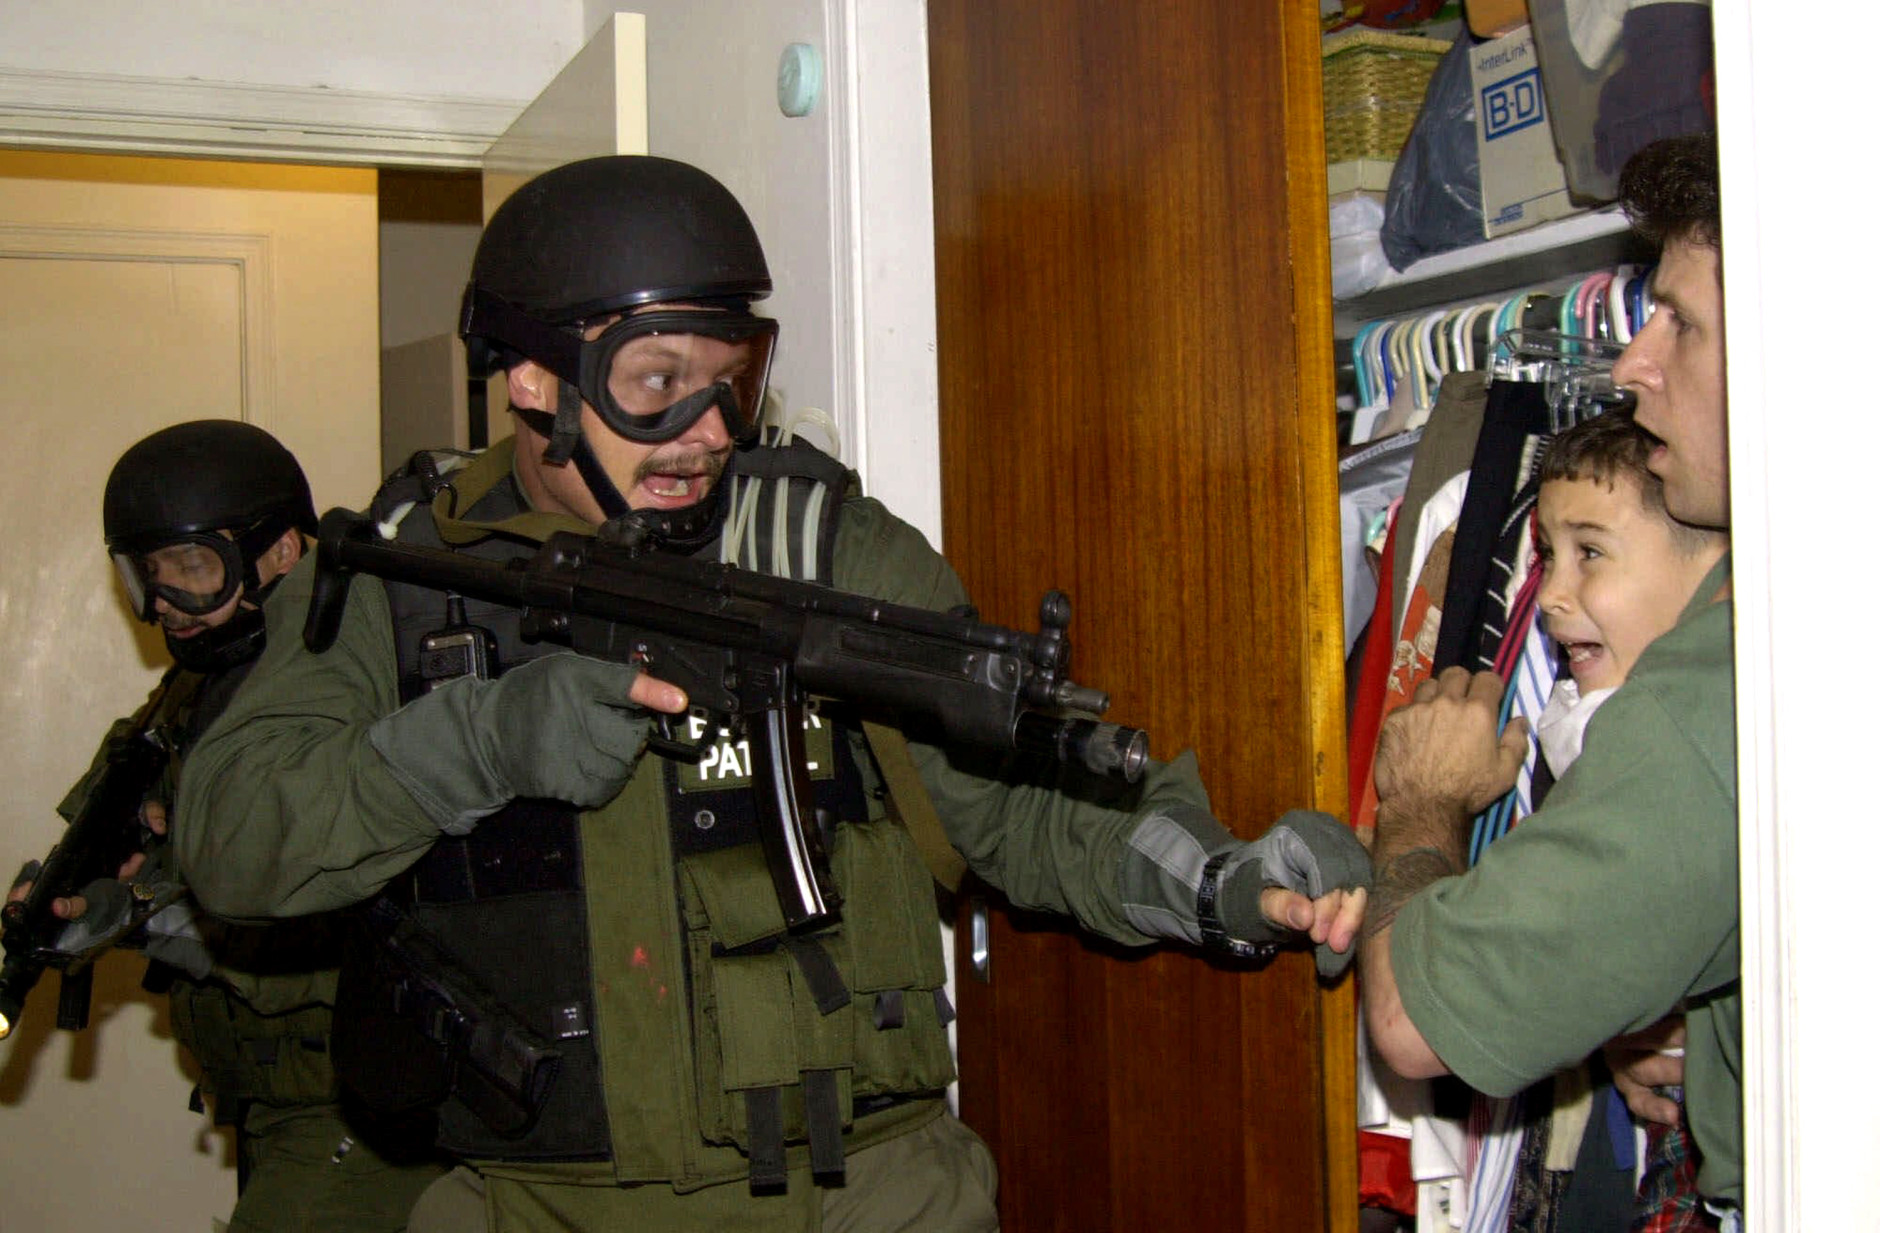 In this third of seven sequential photos, Elian Gonzalez is held in a closet by Donato Dalrymple, one of the two men who rescued the boy from the ocean, right, as government officials search the home of Lazaro Gonzalez for the young boy, early morning, April 22, 2000, in Miami, Florida. Armed federal agents seized Elian Gonzalez from the home of his Miami relatives before dawn, firing tear gas into an angry crowd as they left the scene with the weeping 6-year-old boy. (AP Photo/Alan Diaz)